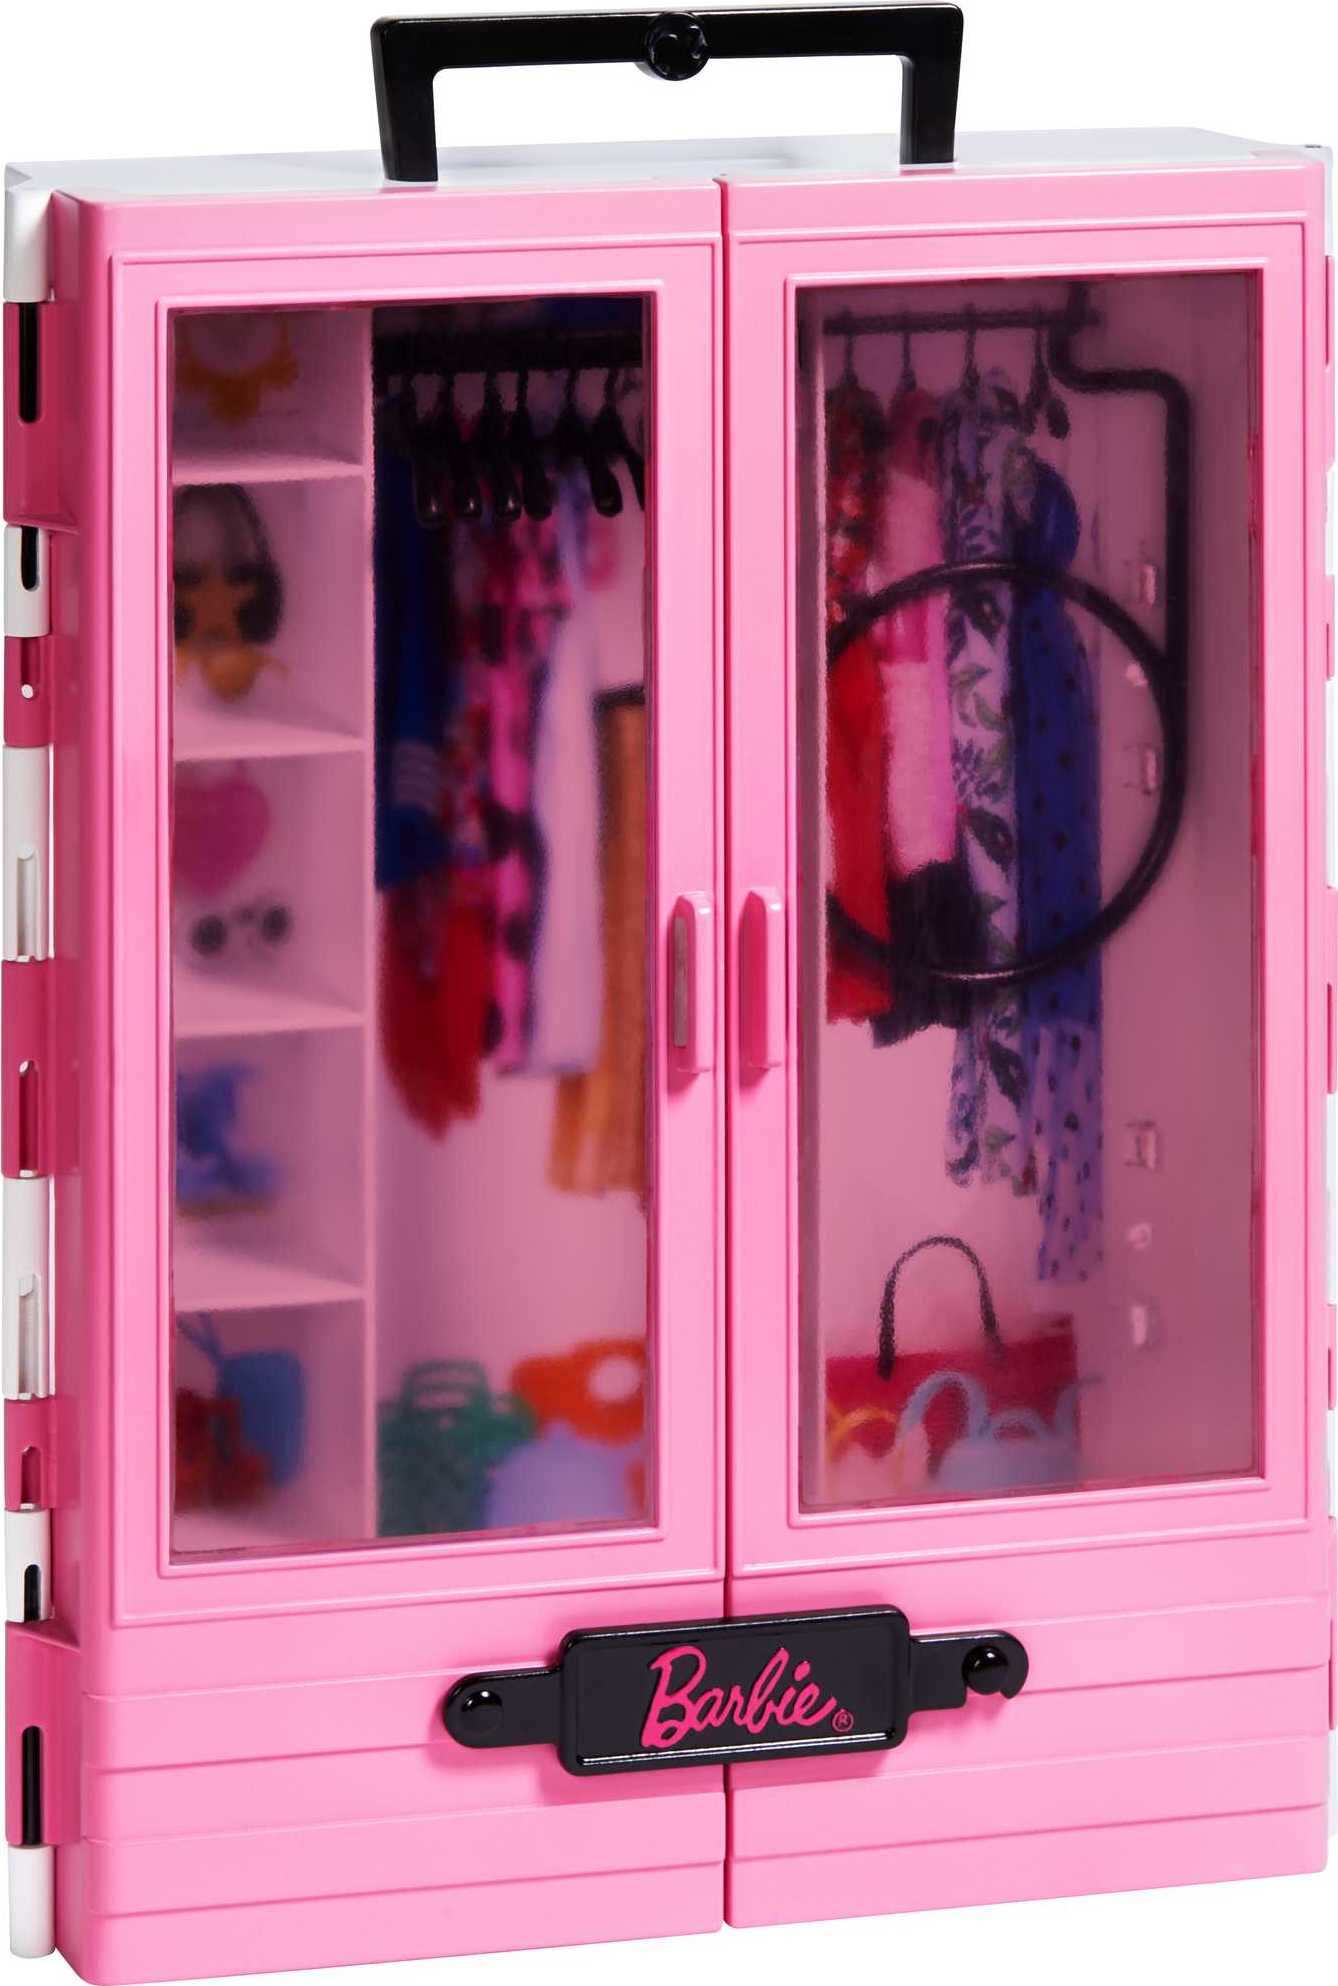 Barbie Fashionista Ultimate Closet Playset with Clothes & Accessories, Includes 5 Hangers - image 4 of 6